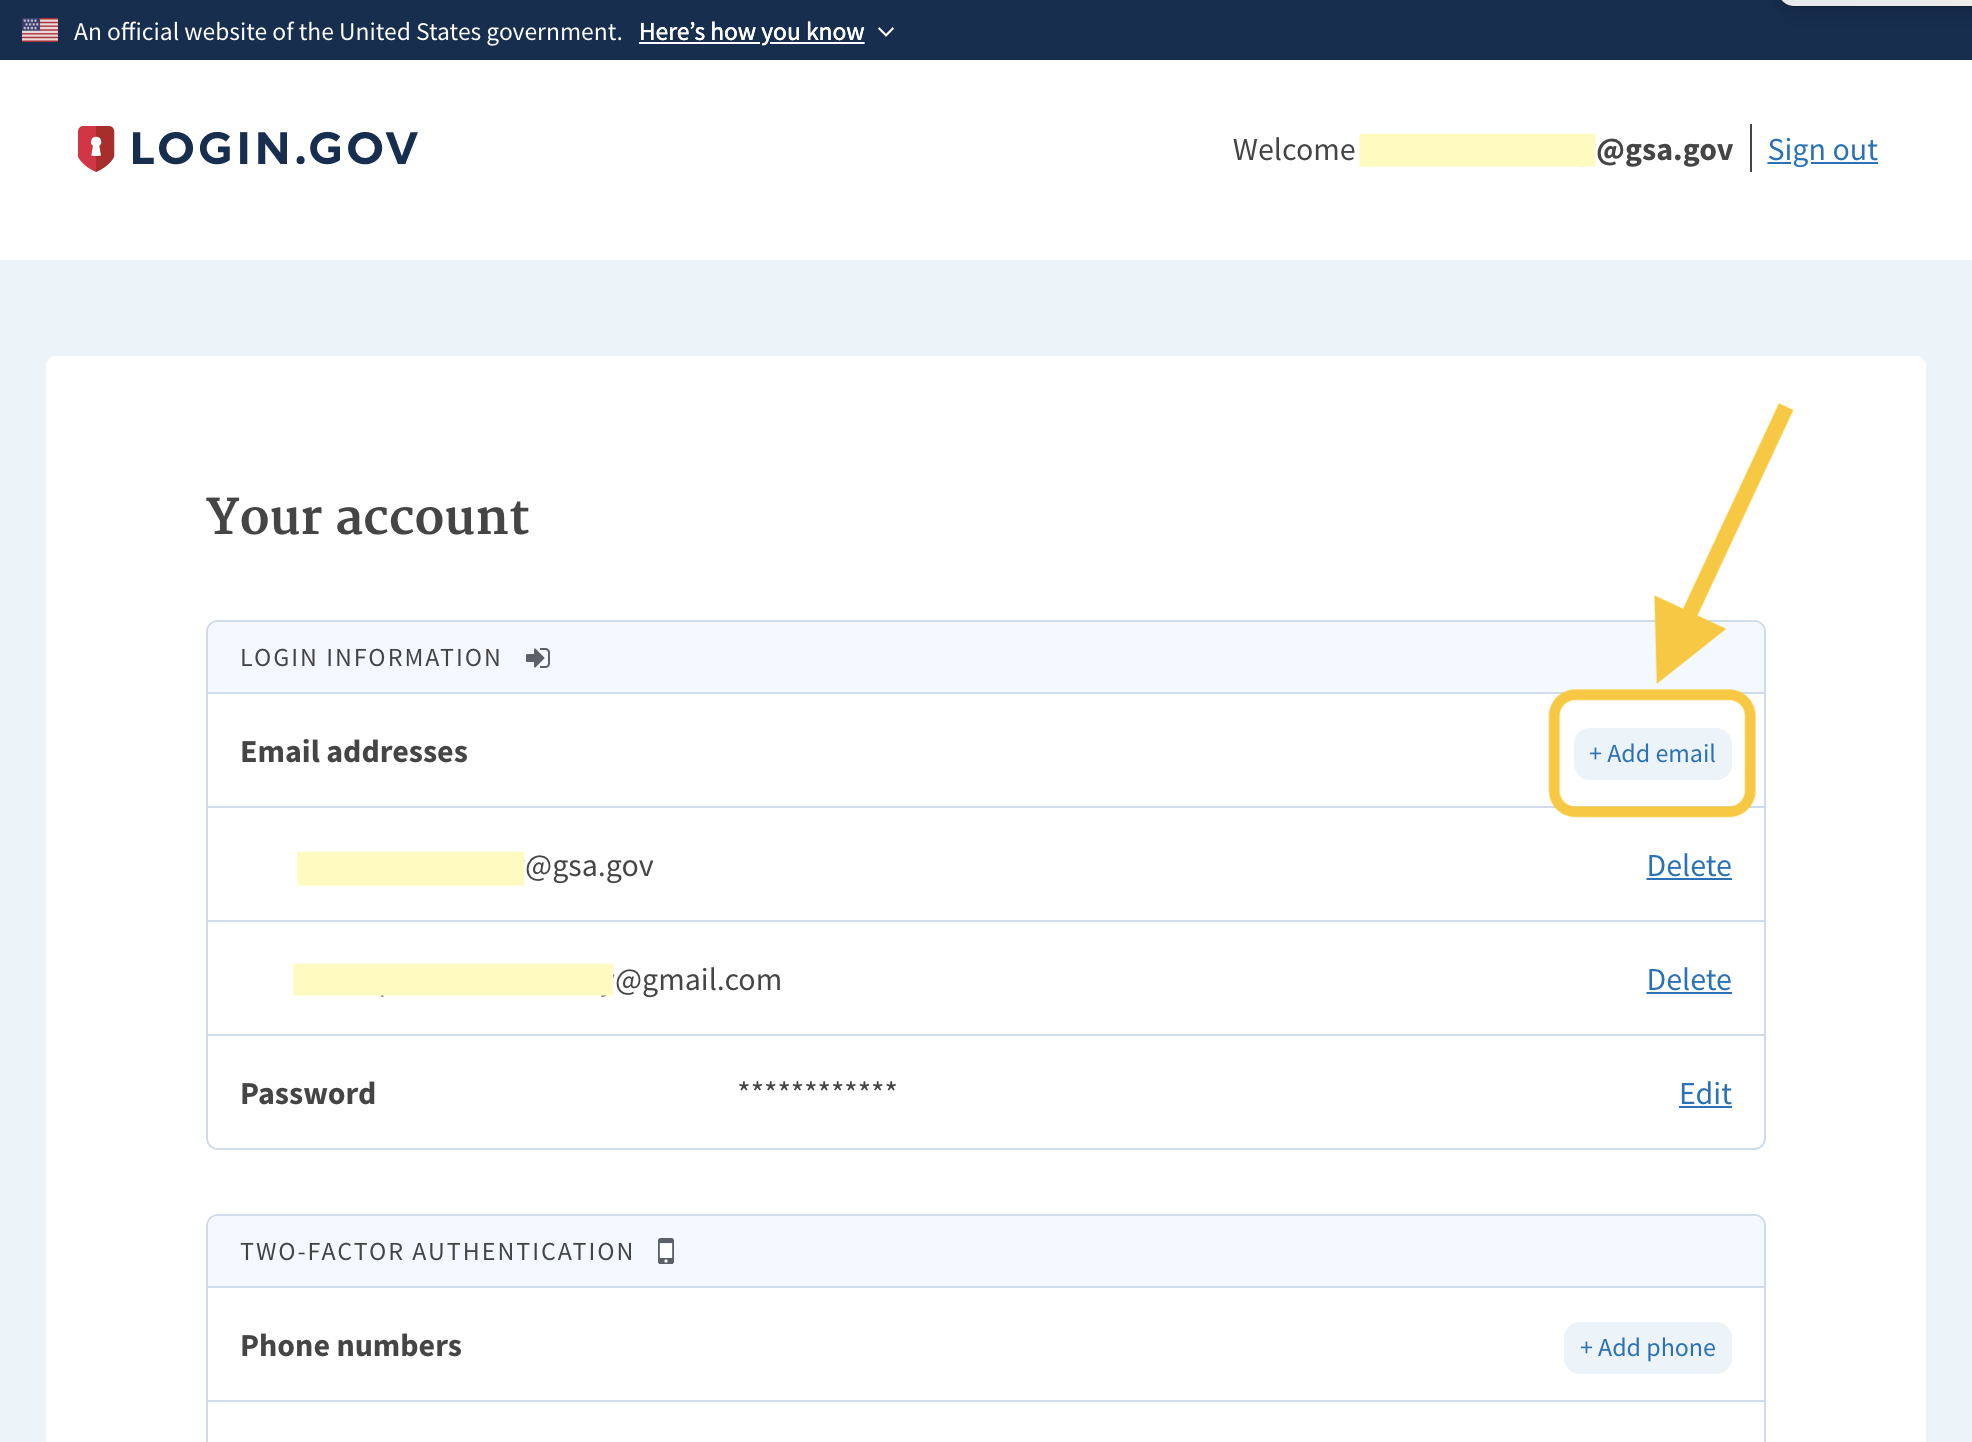 Screenshot of Login.gov account page showing where to find the 'Add email' button